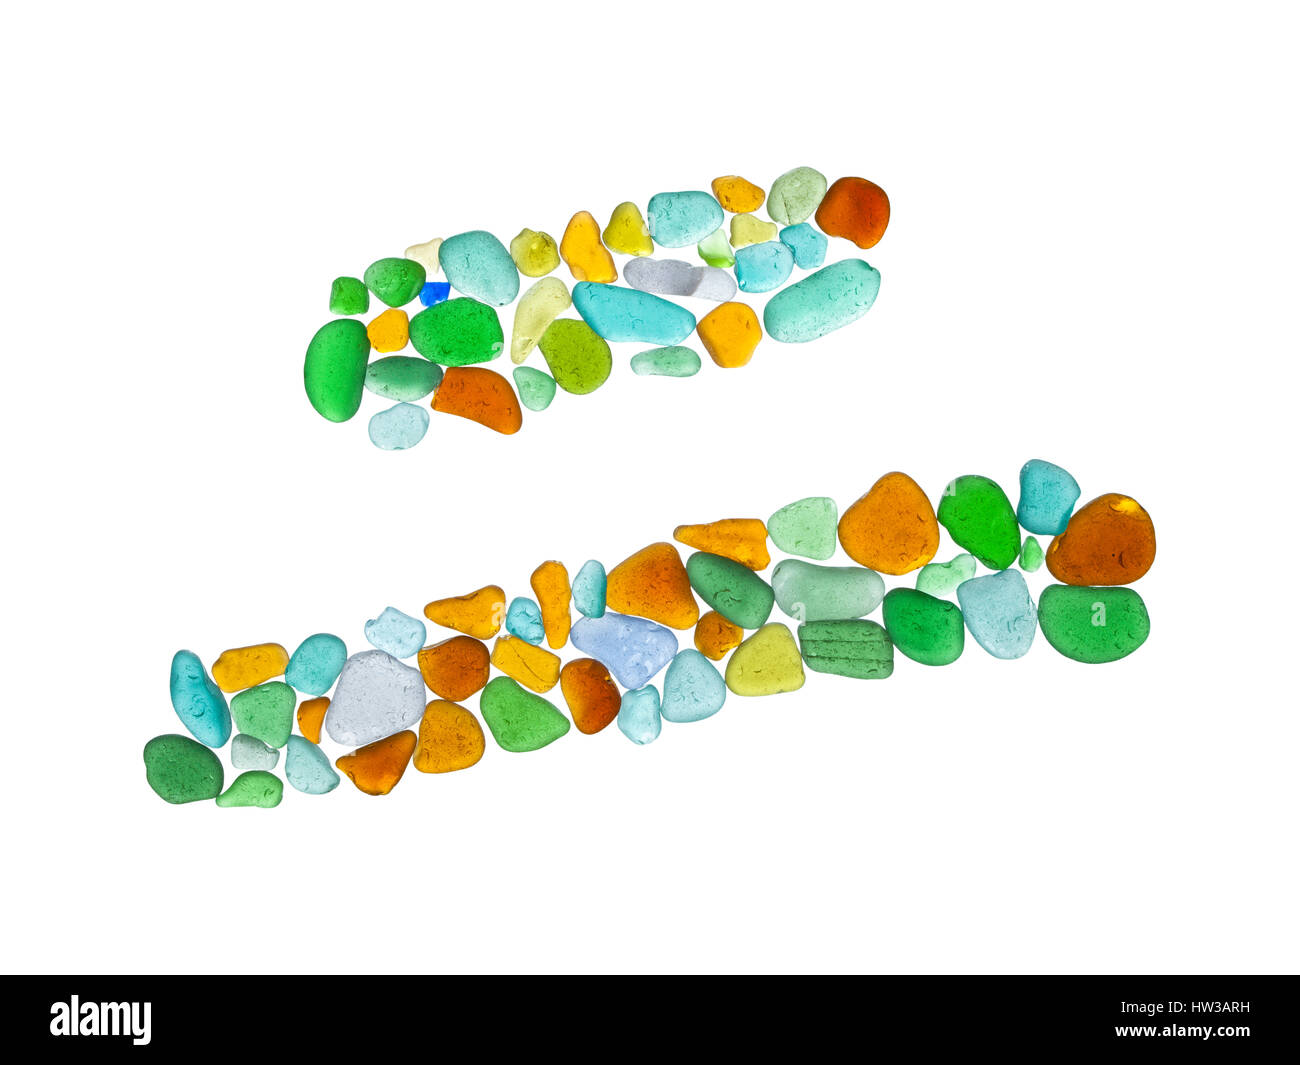 Chinese character er - two, sea glass mosaic Stock Photo